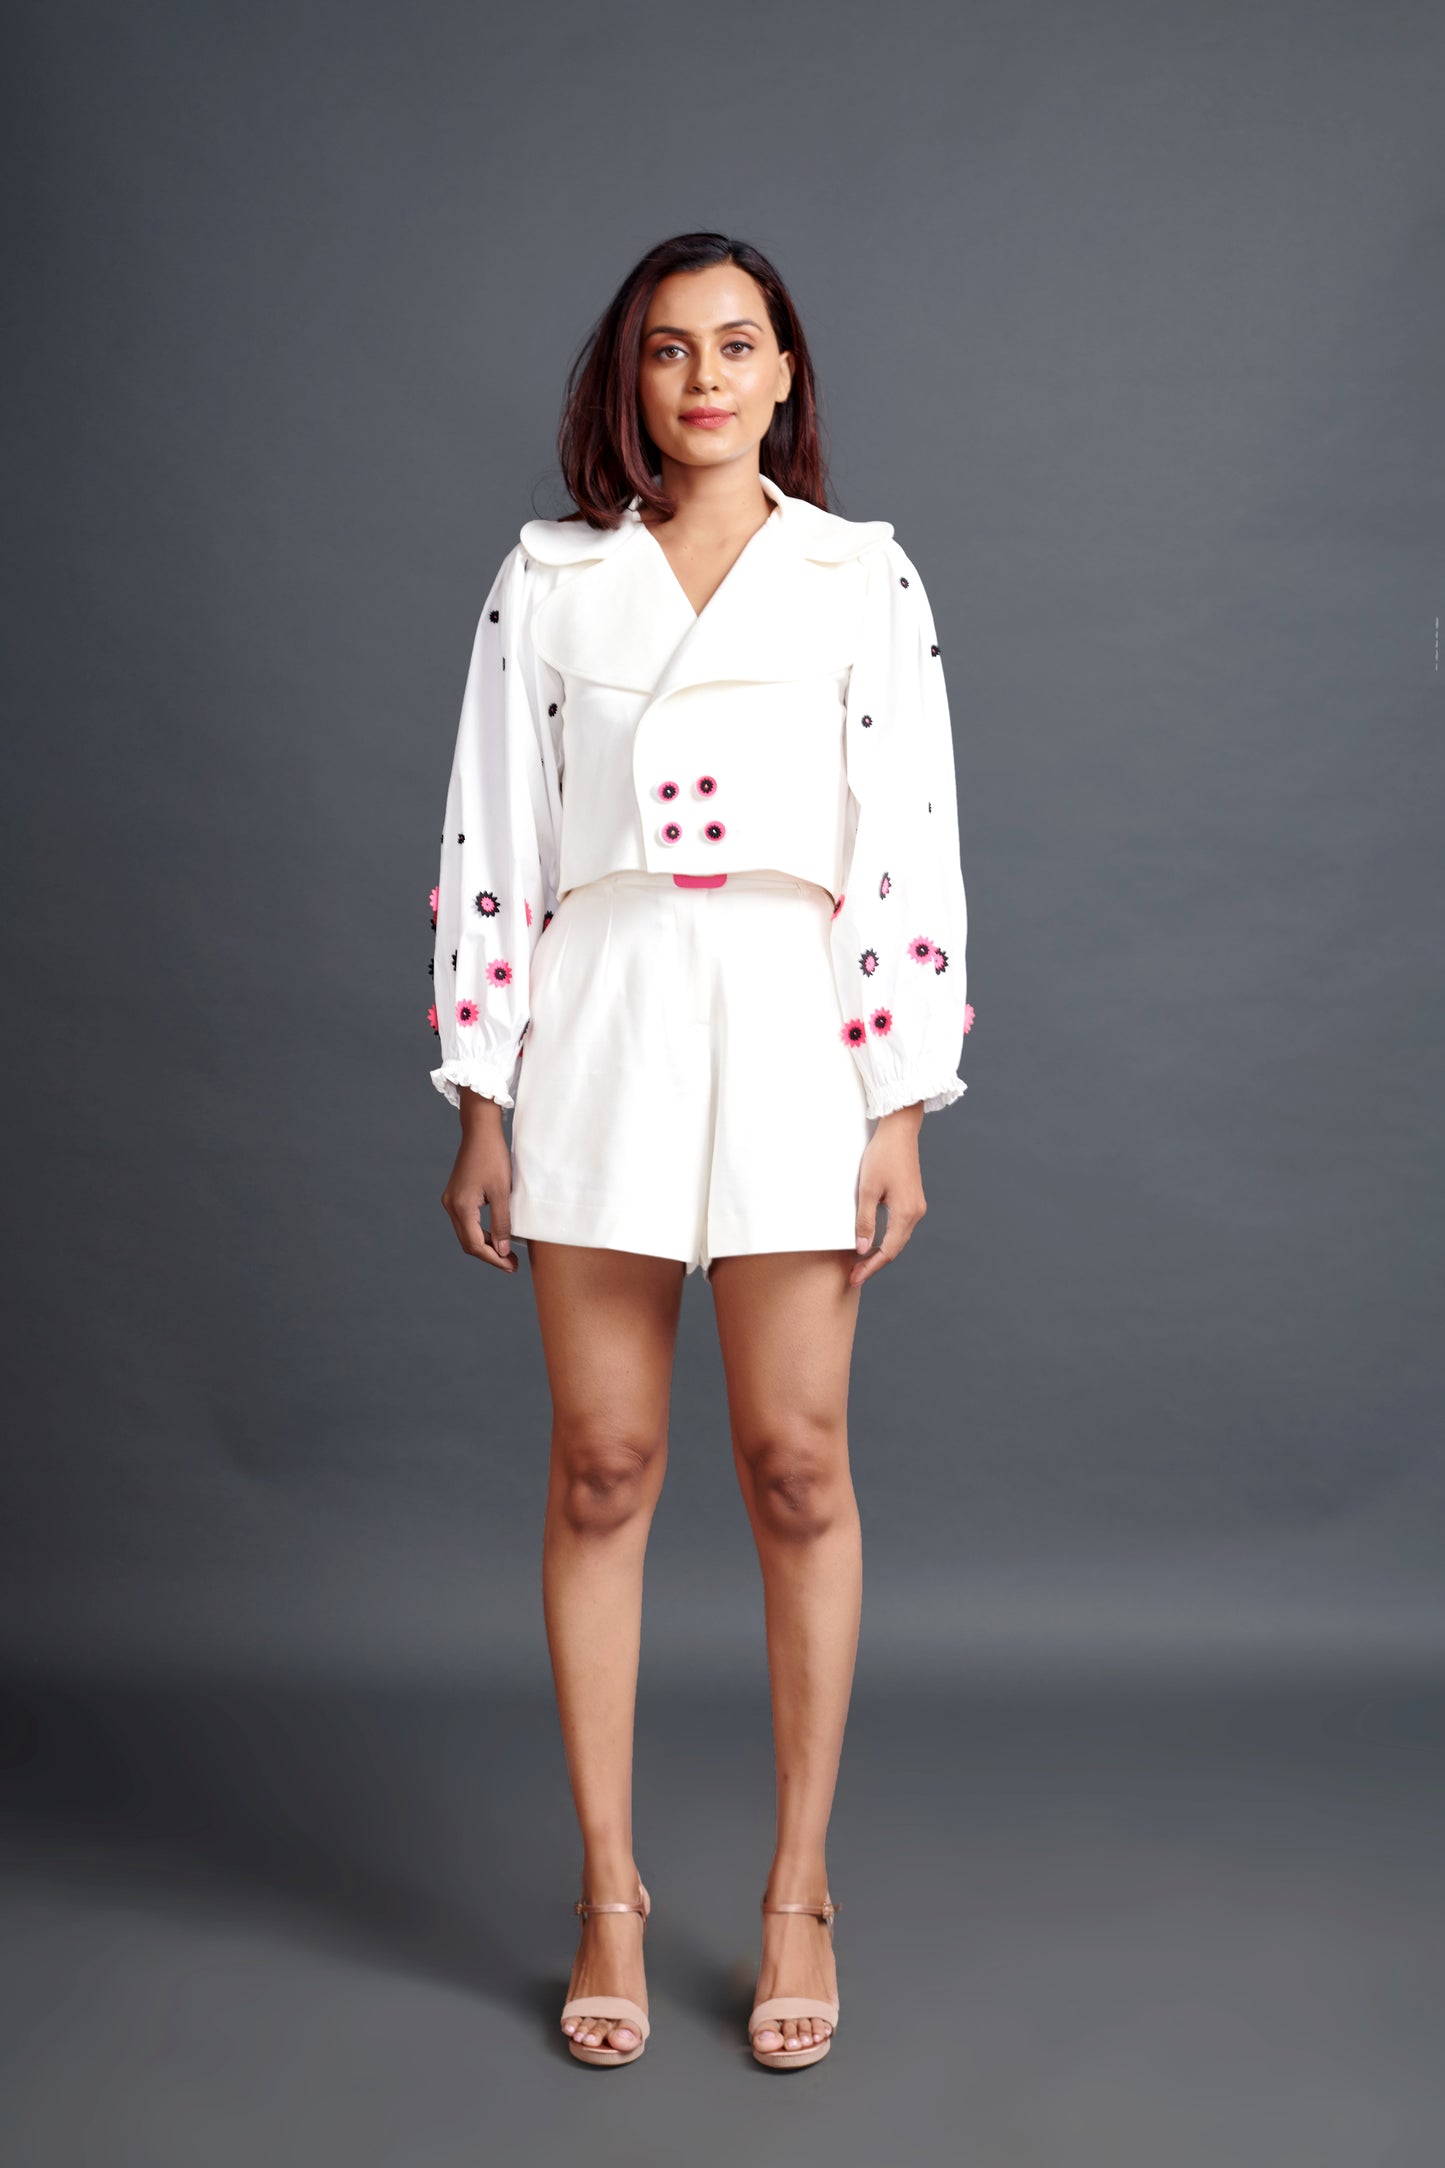 Image of WHITE CUT WORK DETAILED SLEEVED OVERLAP CROP JACKET AND SHORTS. From savoirfashions.com